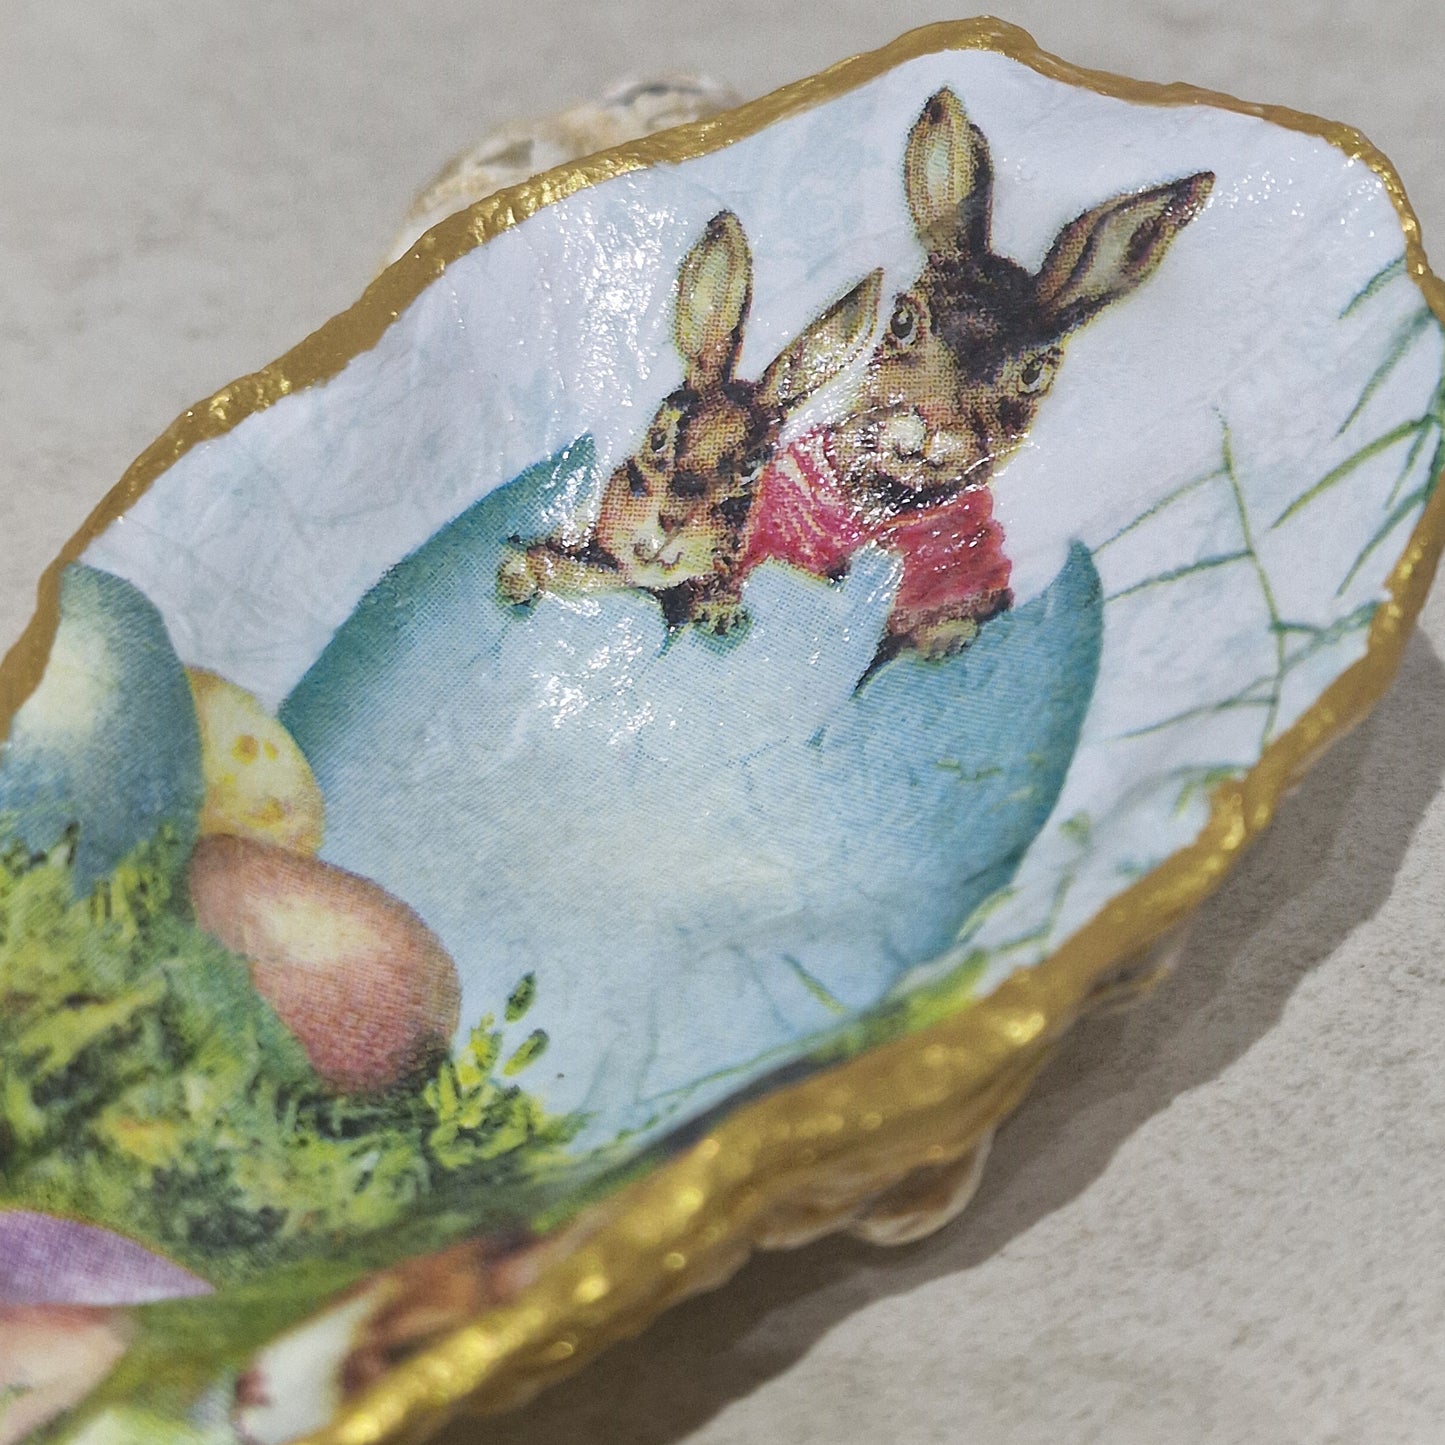 NEW Easter Bunny Bunnies Egg Oyster Shell Trinket Dish Jewellery Holder Gift